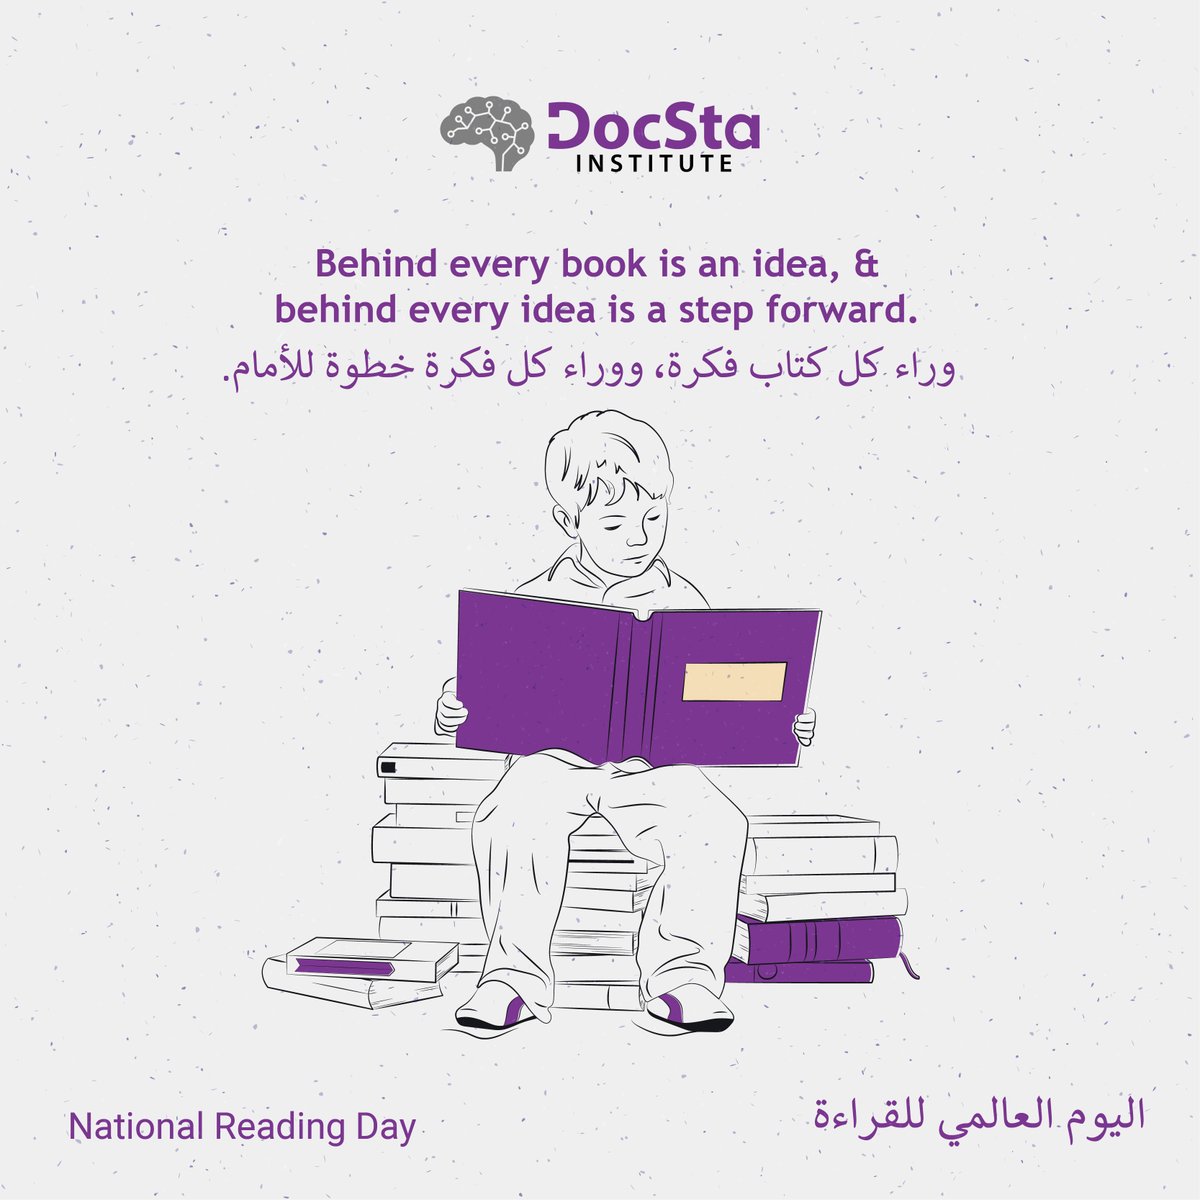 On National Reading Day, may books inspire and knowledge flourish!

#HappyReadingDay
#worldreadingday
#NationalReadingDay
#readforfun
#readforknowledge
#readforescape
#readforinspiration
#readfortheloveofit
#booksarelife
#booklover